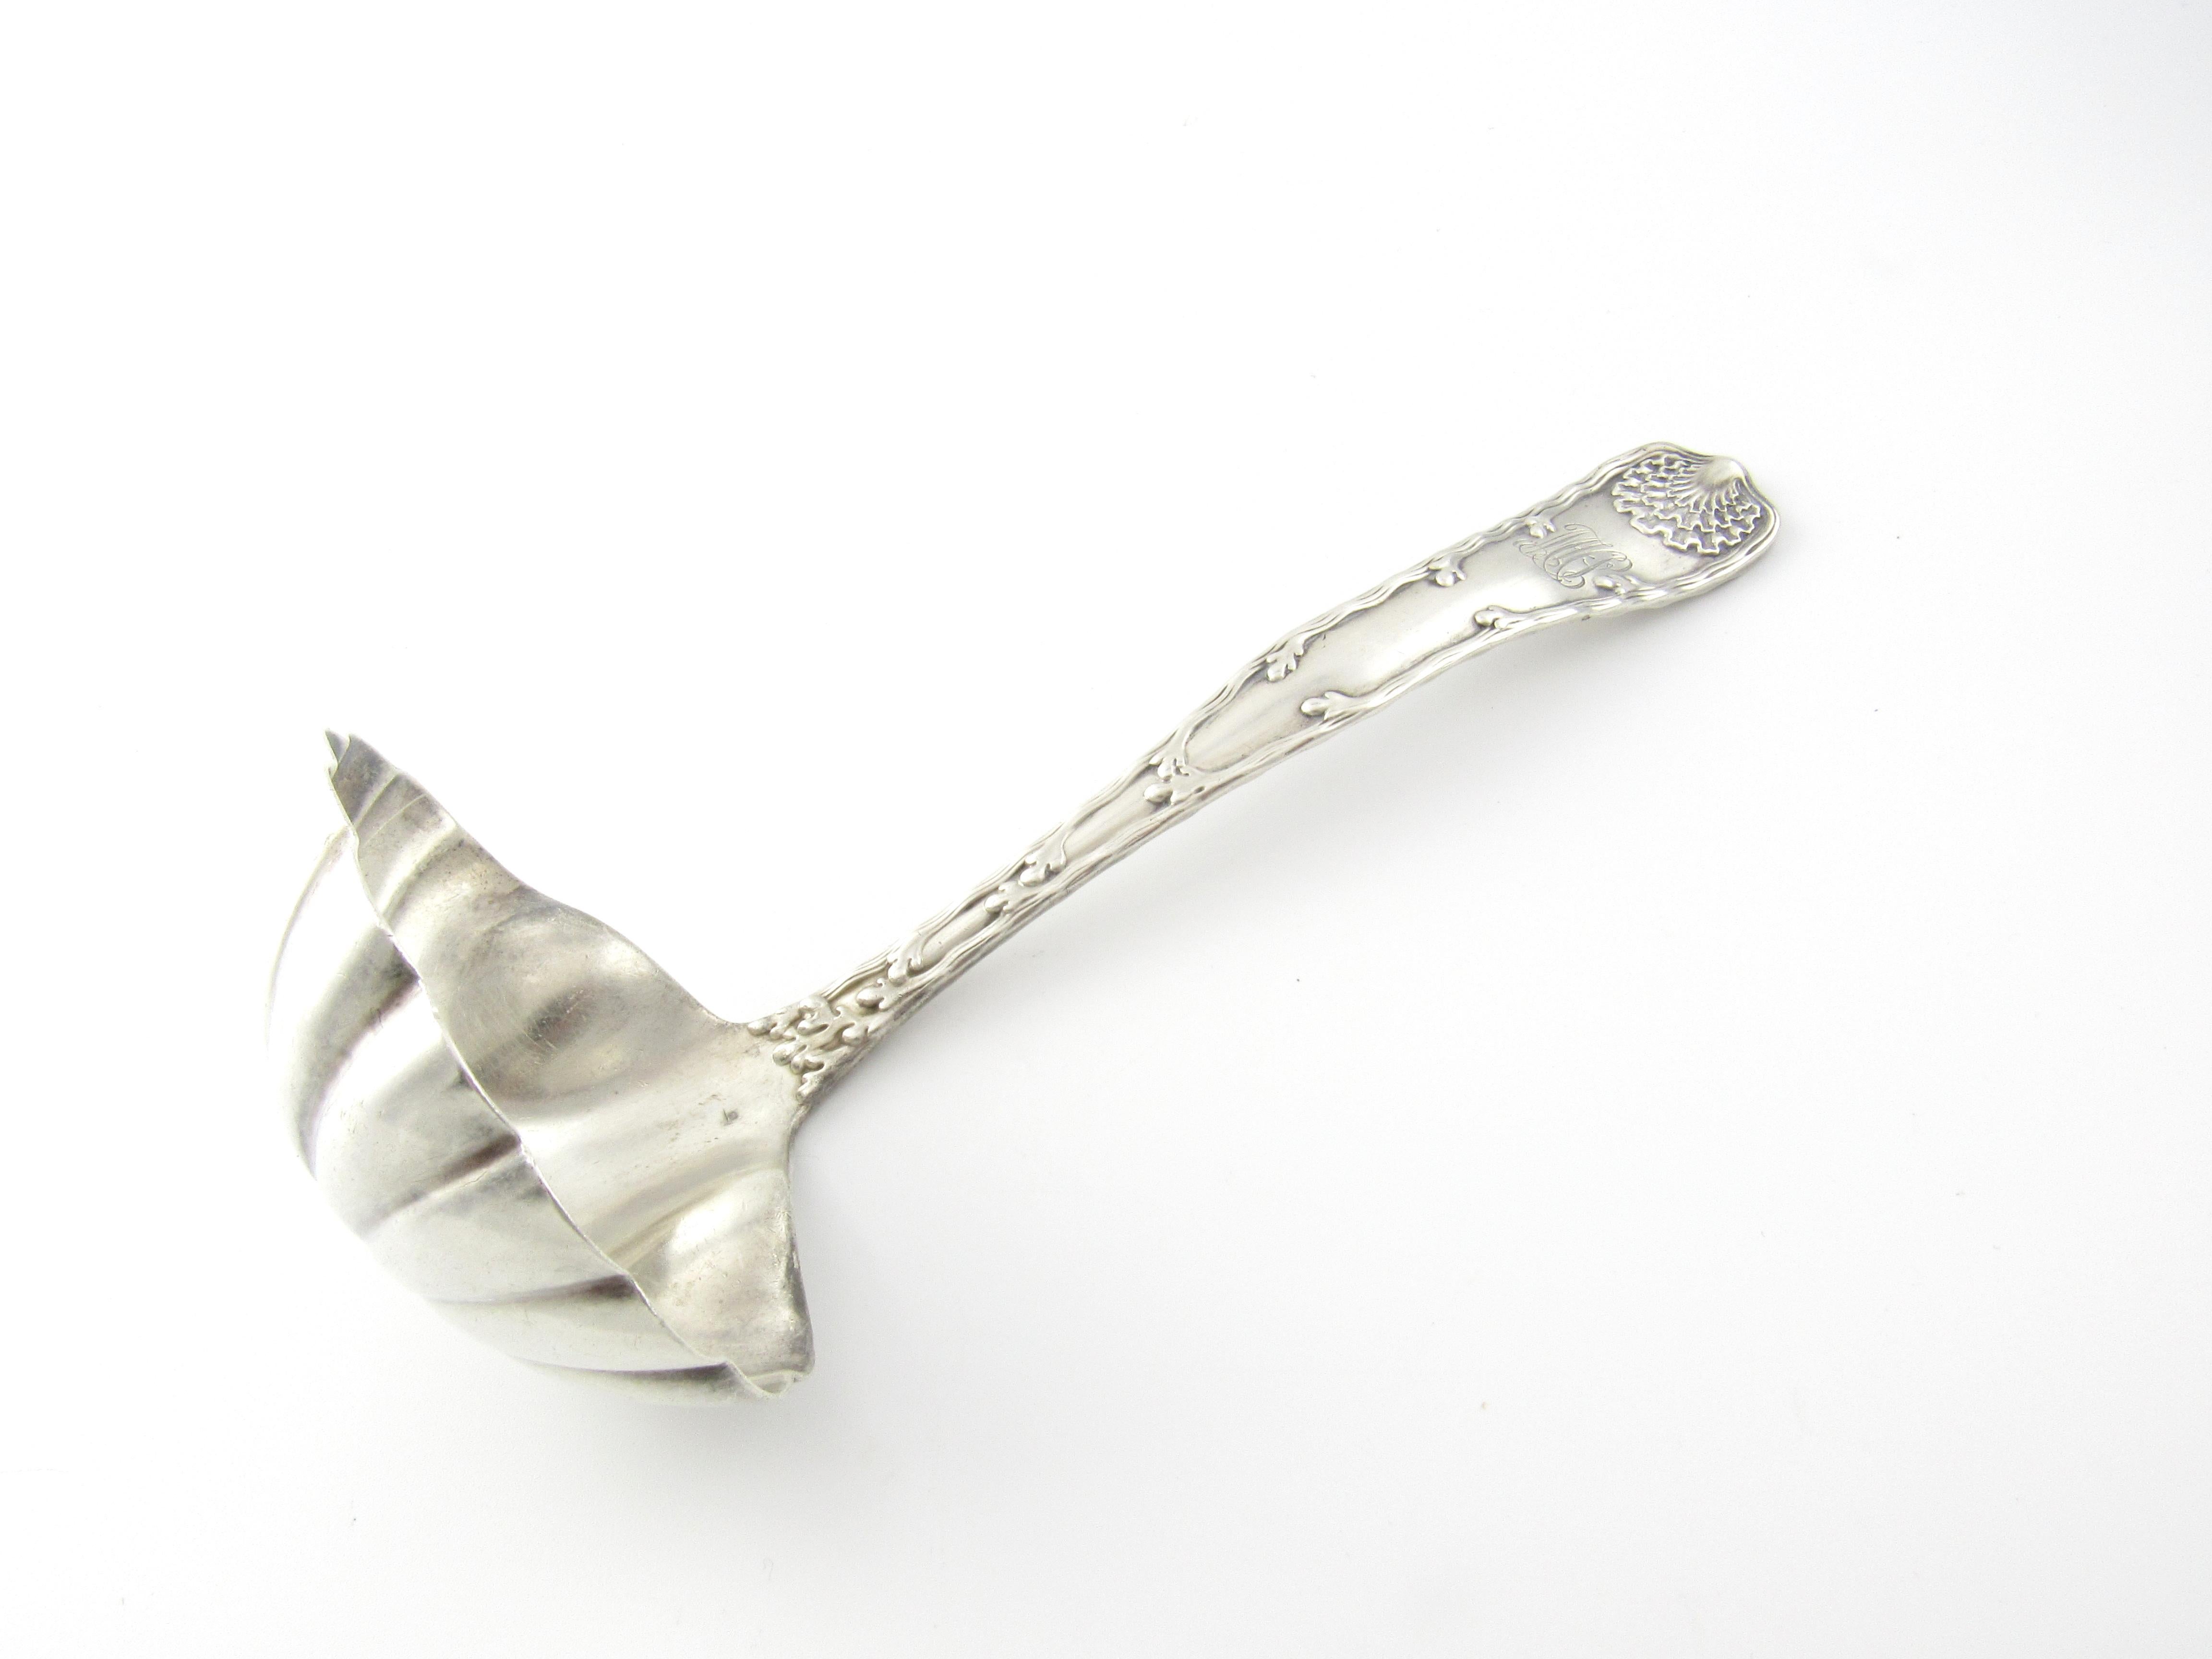 Women's or Men's Tiffany & Co. Wave Edge Sterling Silver Ladle with Monogram